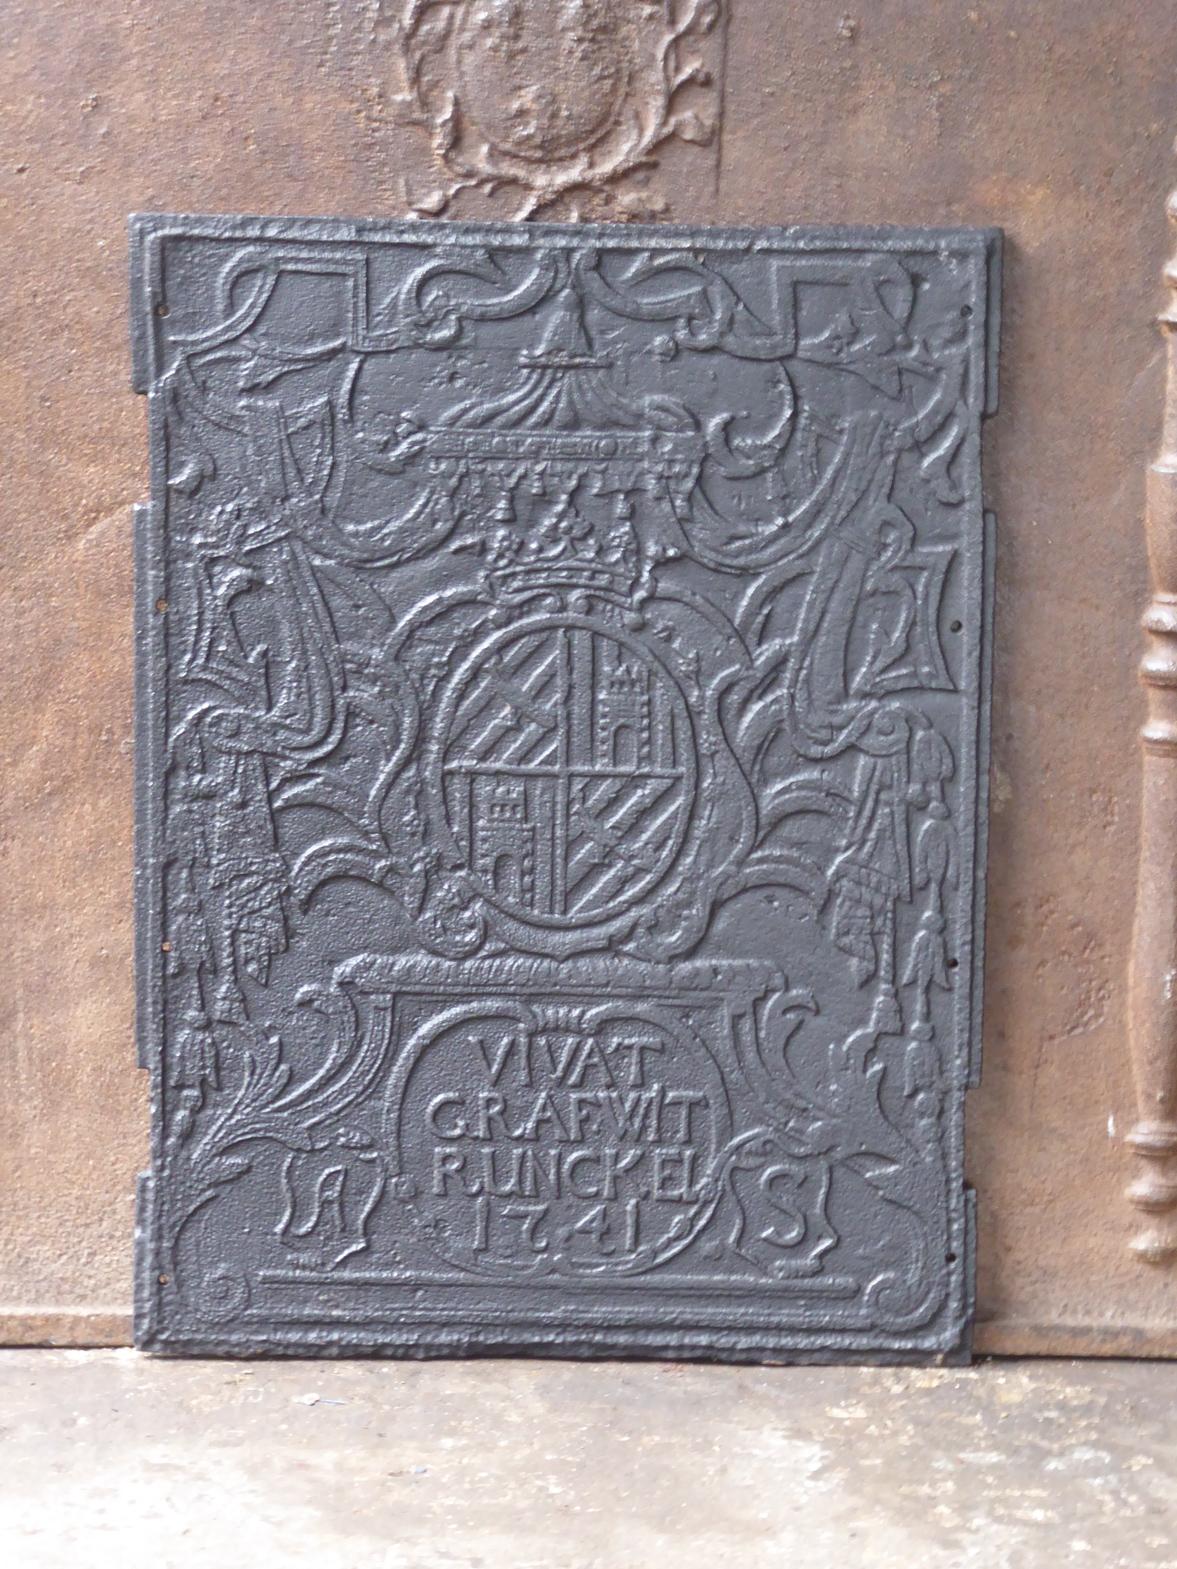 18th century German Louis XV fireback with a coat of arms. 

The fireback is made of cast iron and has a black / pewter patina. The condition is good, no cracks.







